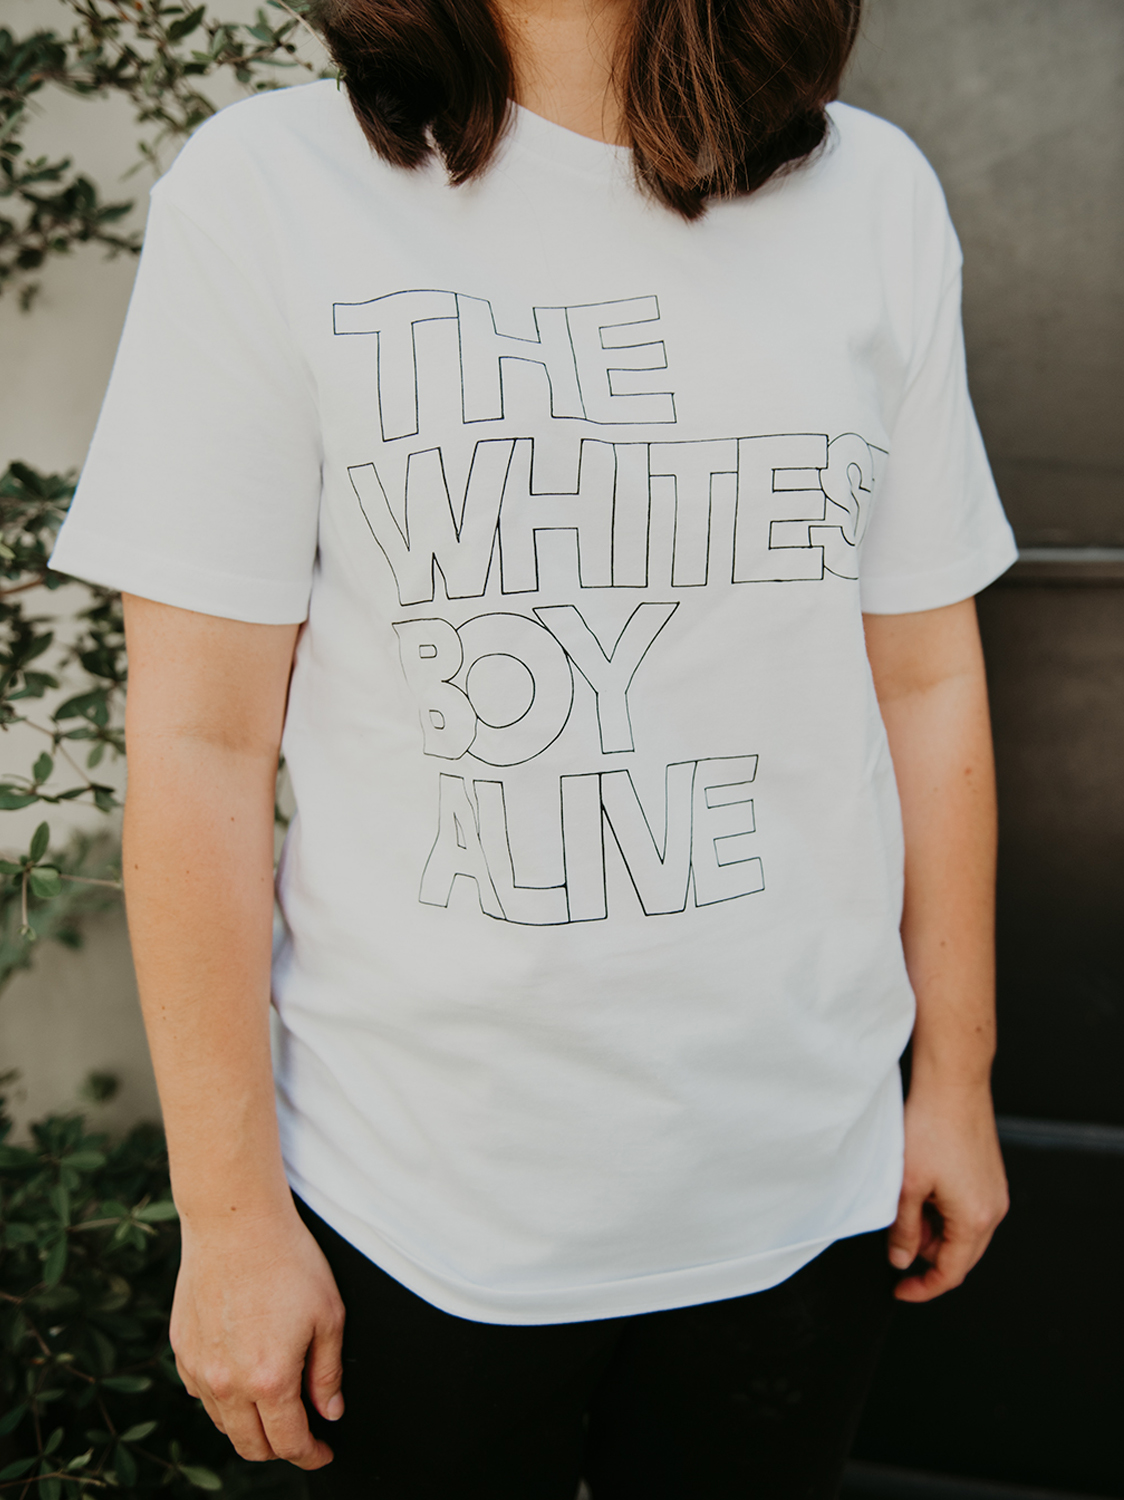 The Whitest Boy Alive Mexico T-Shirt - Say Yes